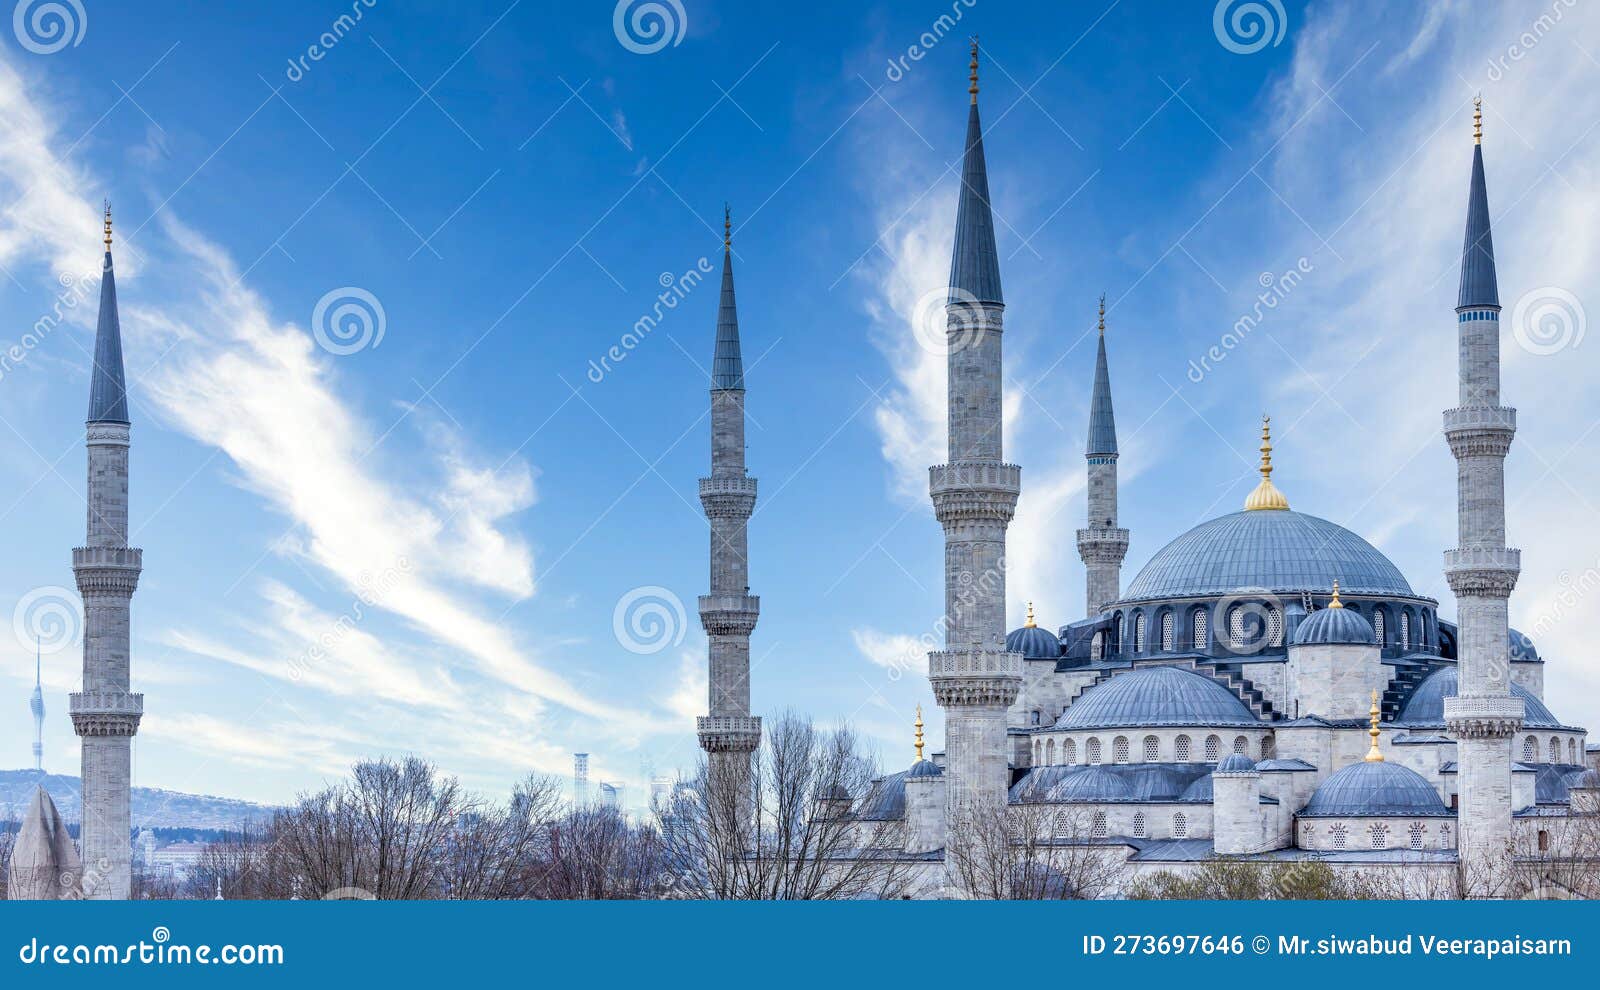 the biggest mosque in istanbul turkiye of sultan ahmed ottoman empire, blue mosque sultanahmet camii sultan ahmed mosque in old